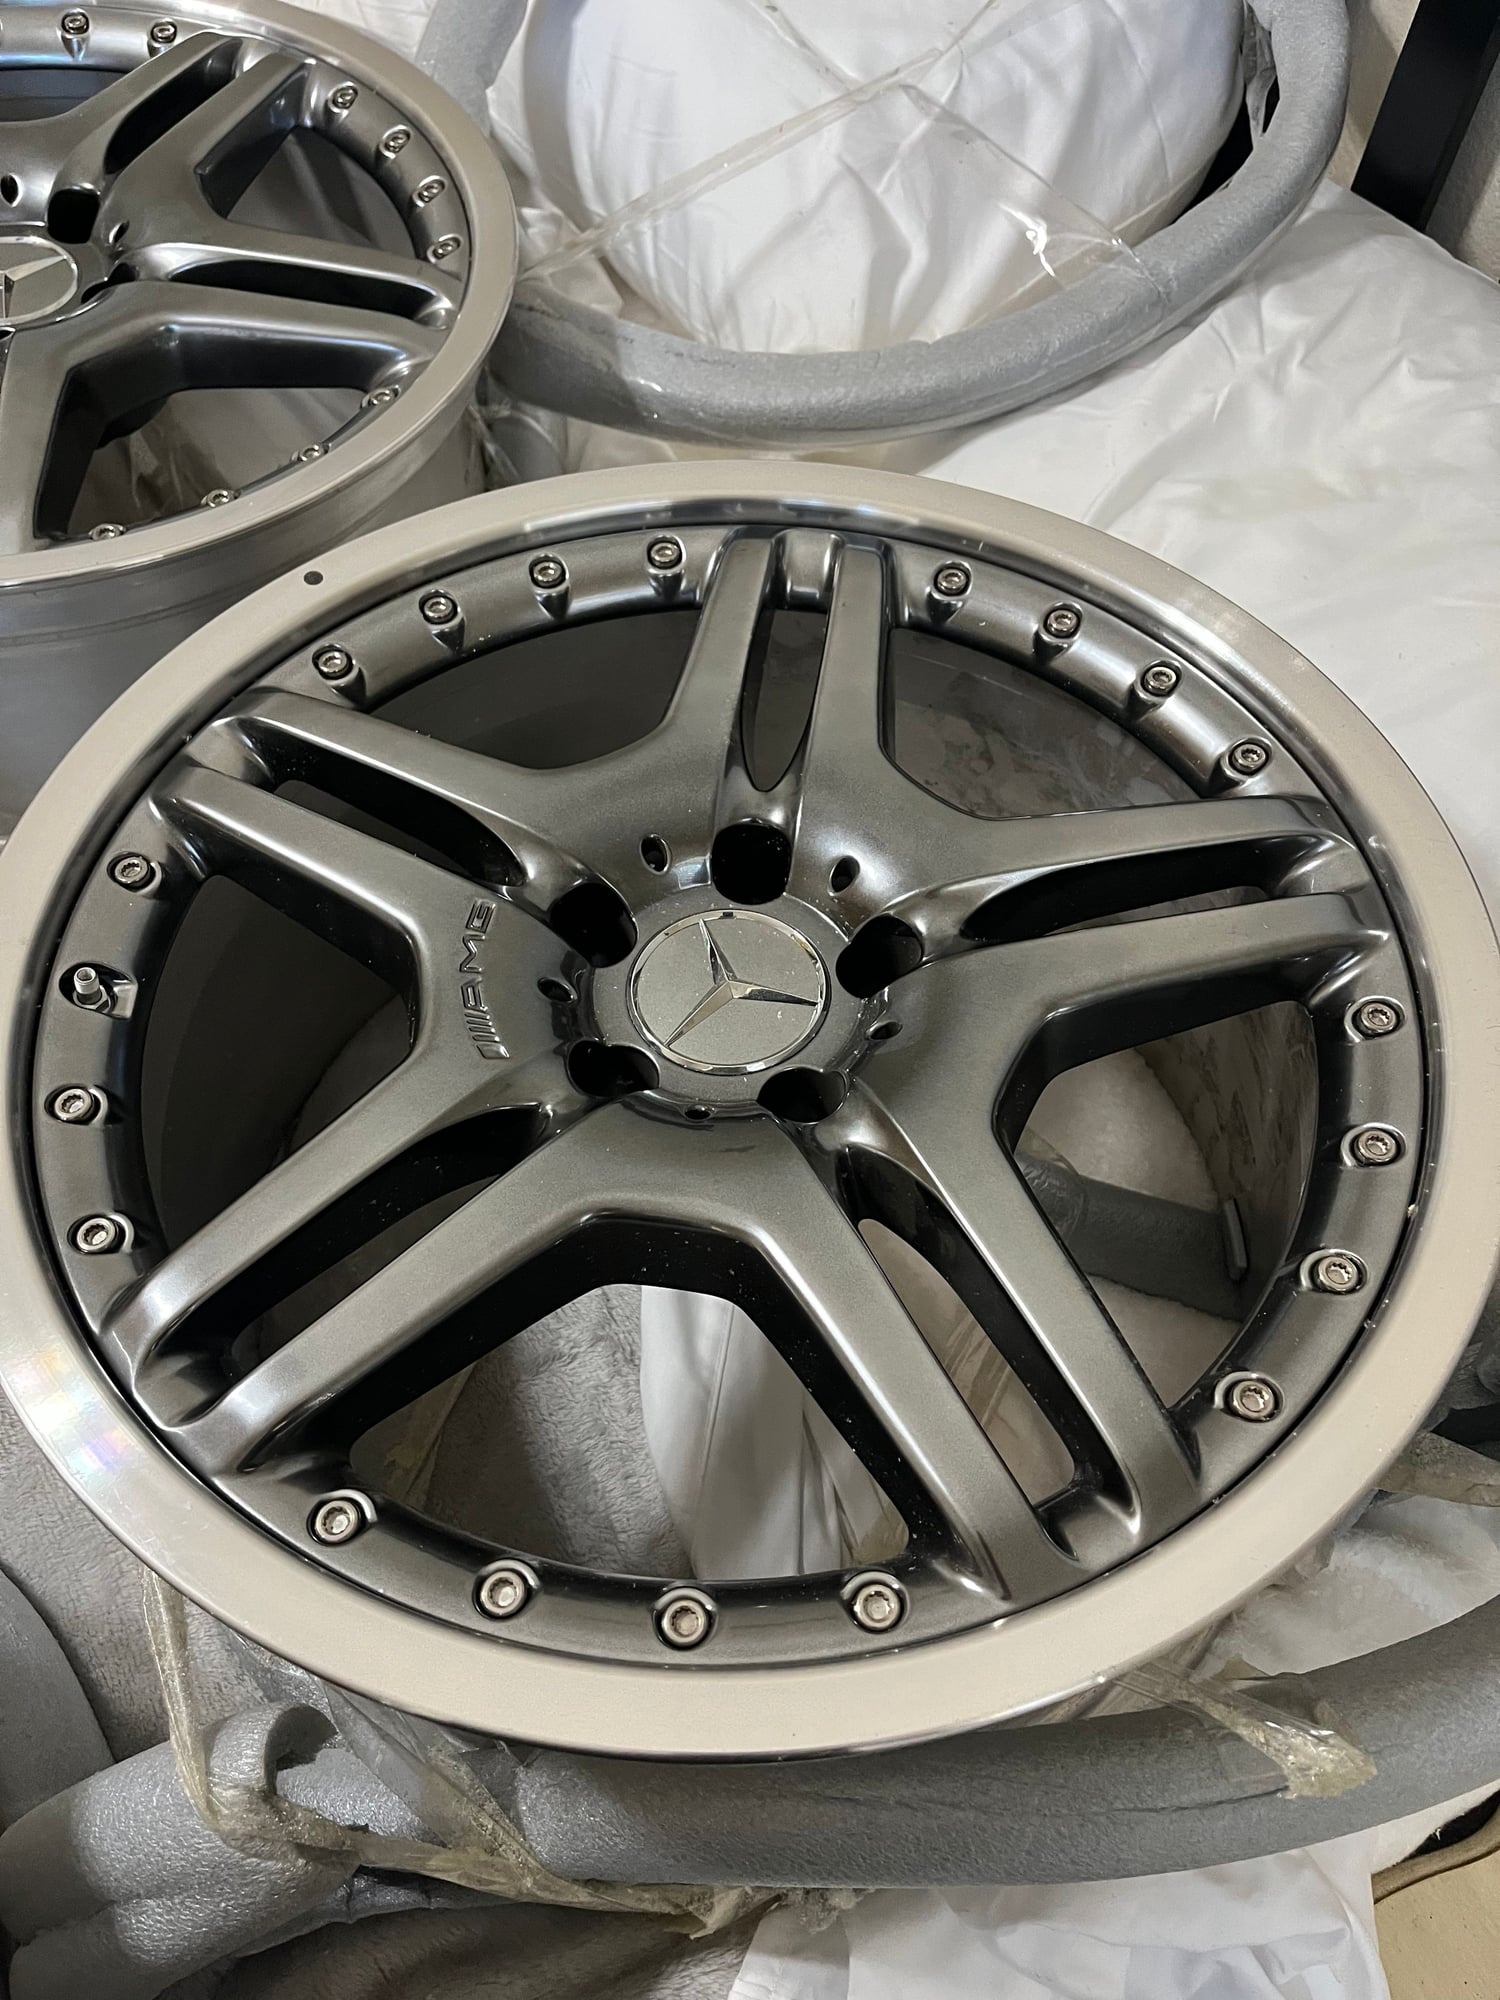 Wheels and Tires/Axles - NOS R230 SL65 wheels - Used - 2003 to 2011 Mercedes-Benz R320 - Austin, TX 78665, United States